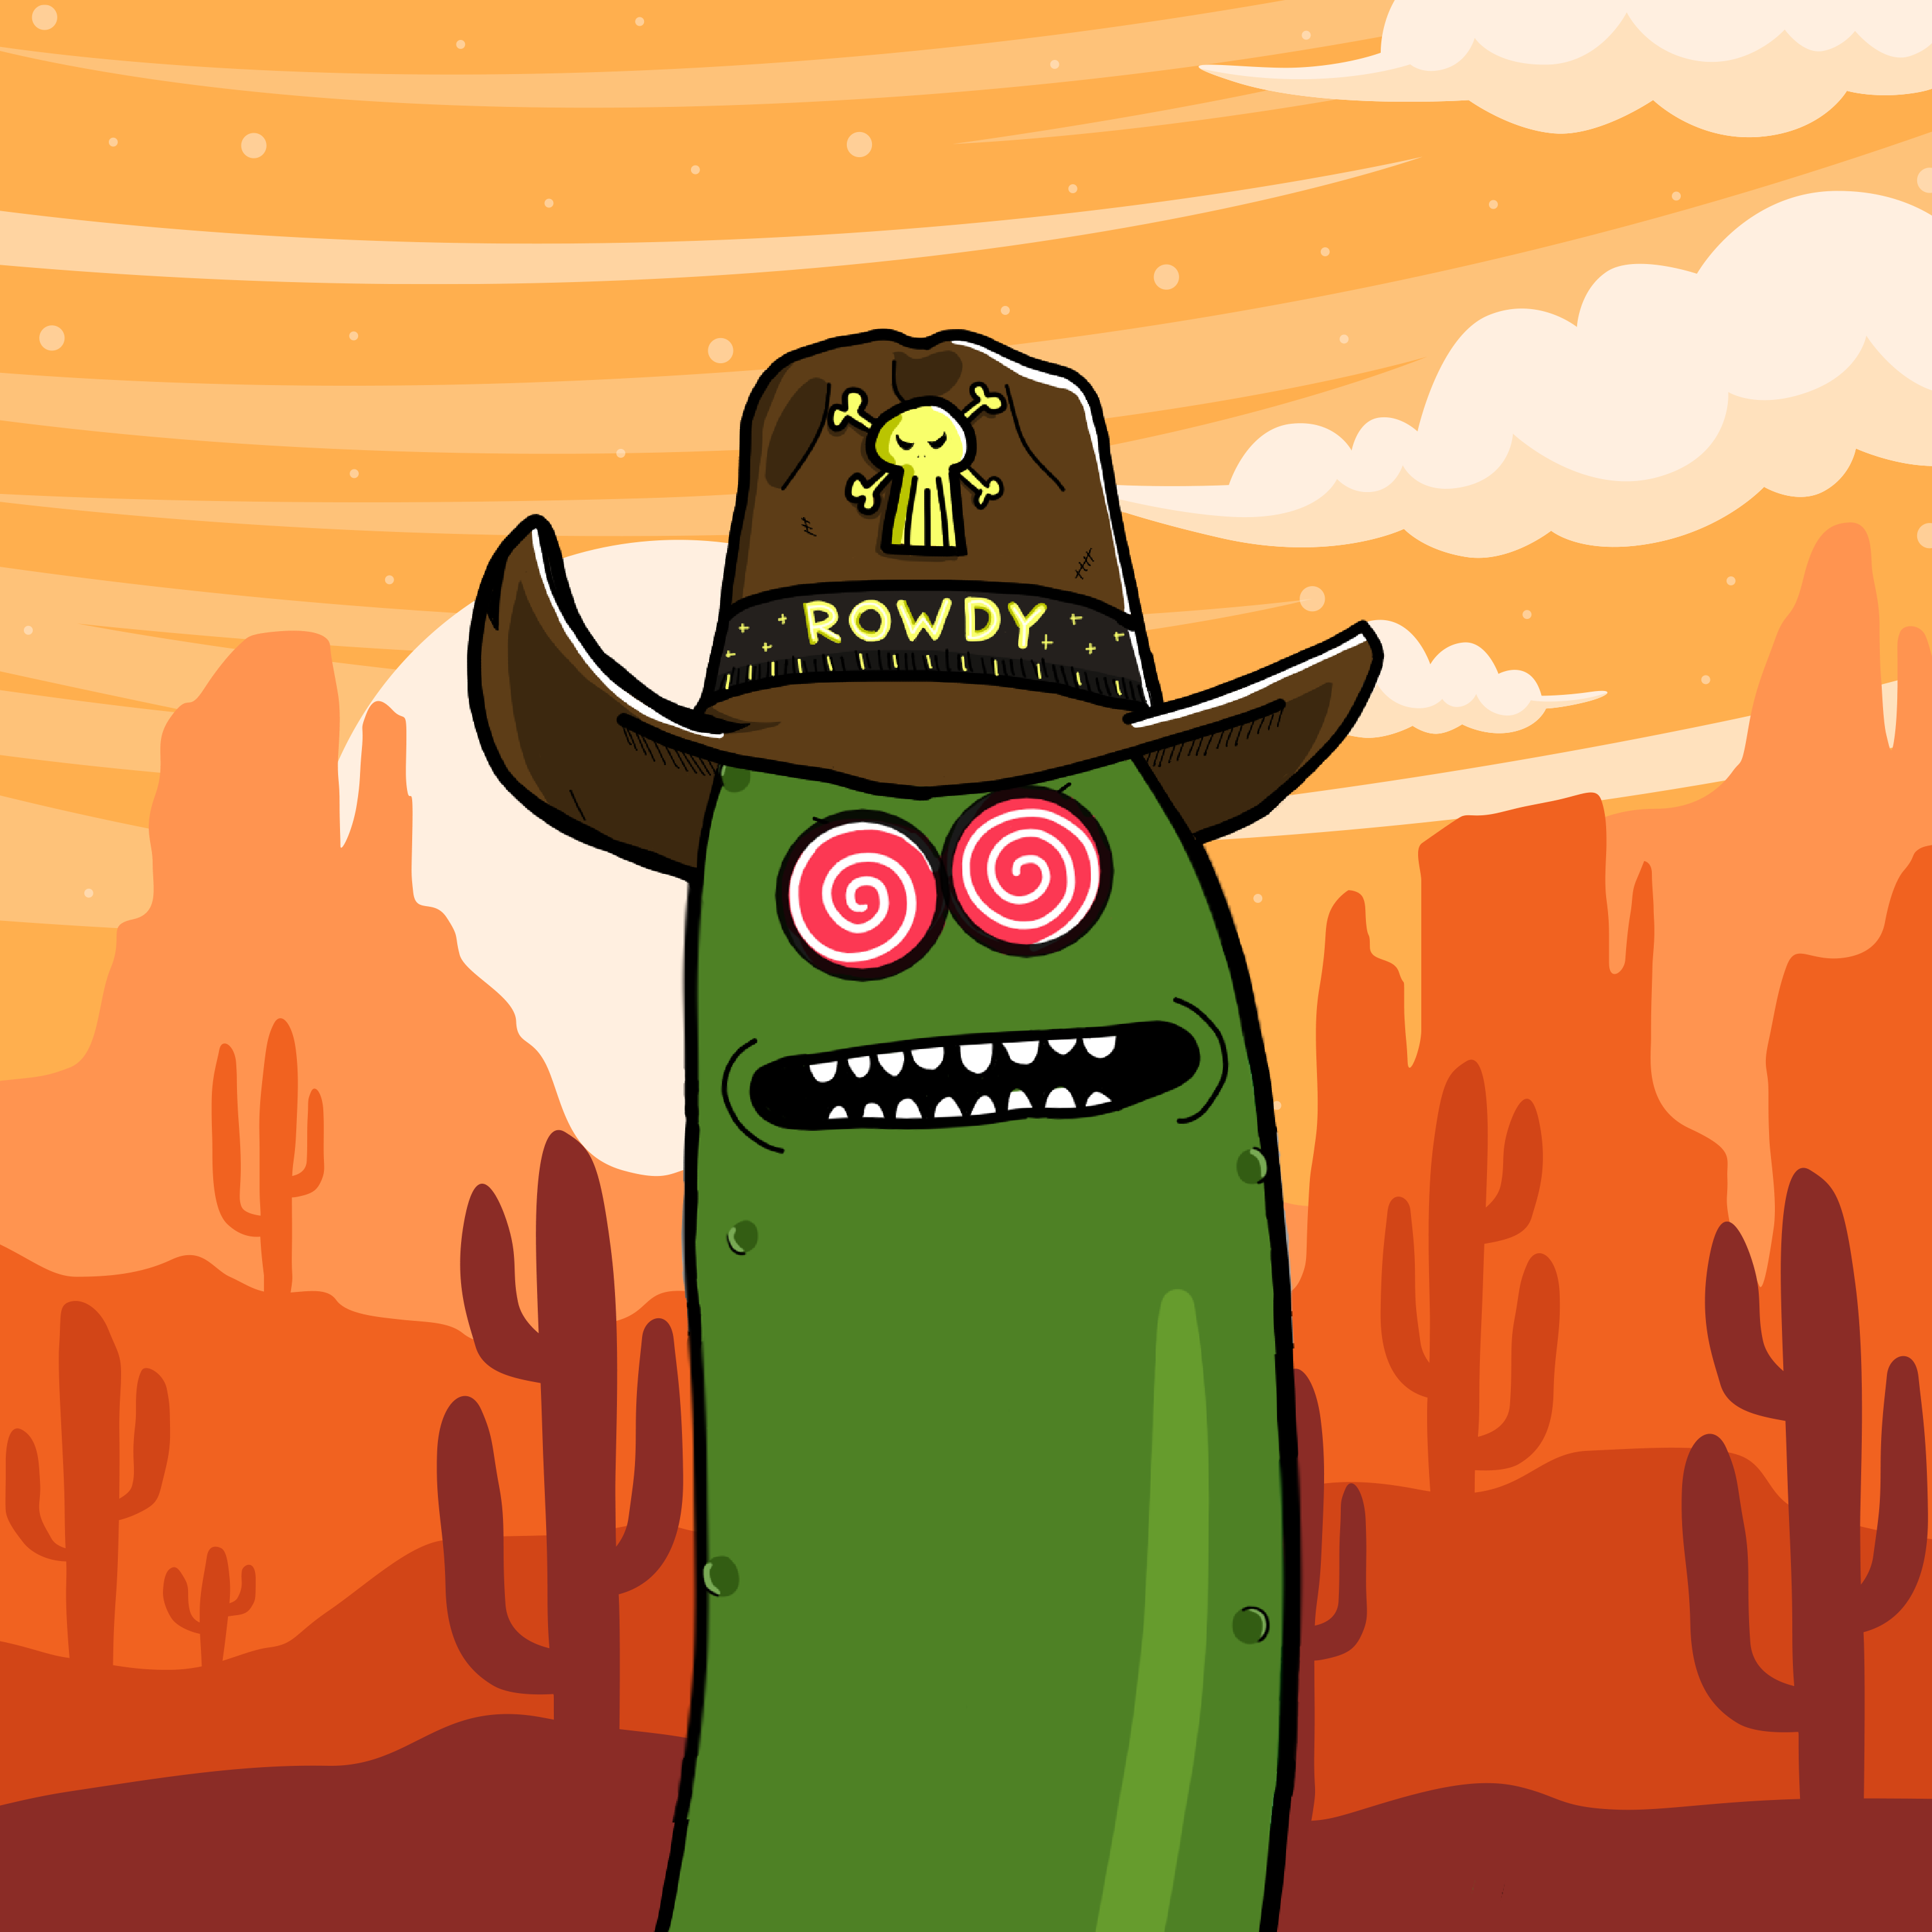 The Rowdy Pickles